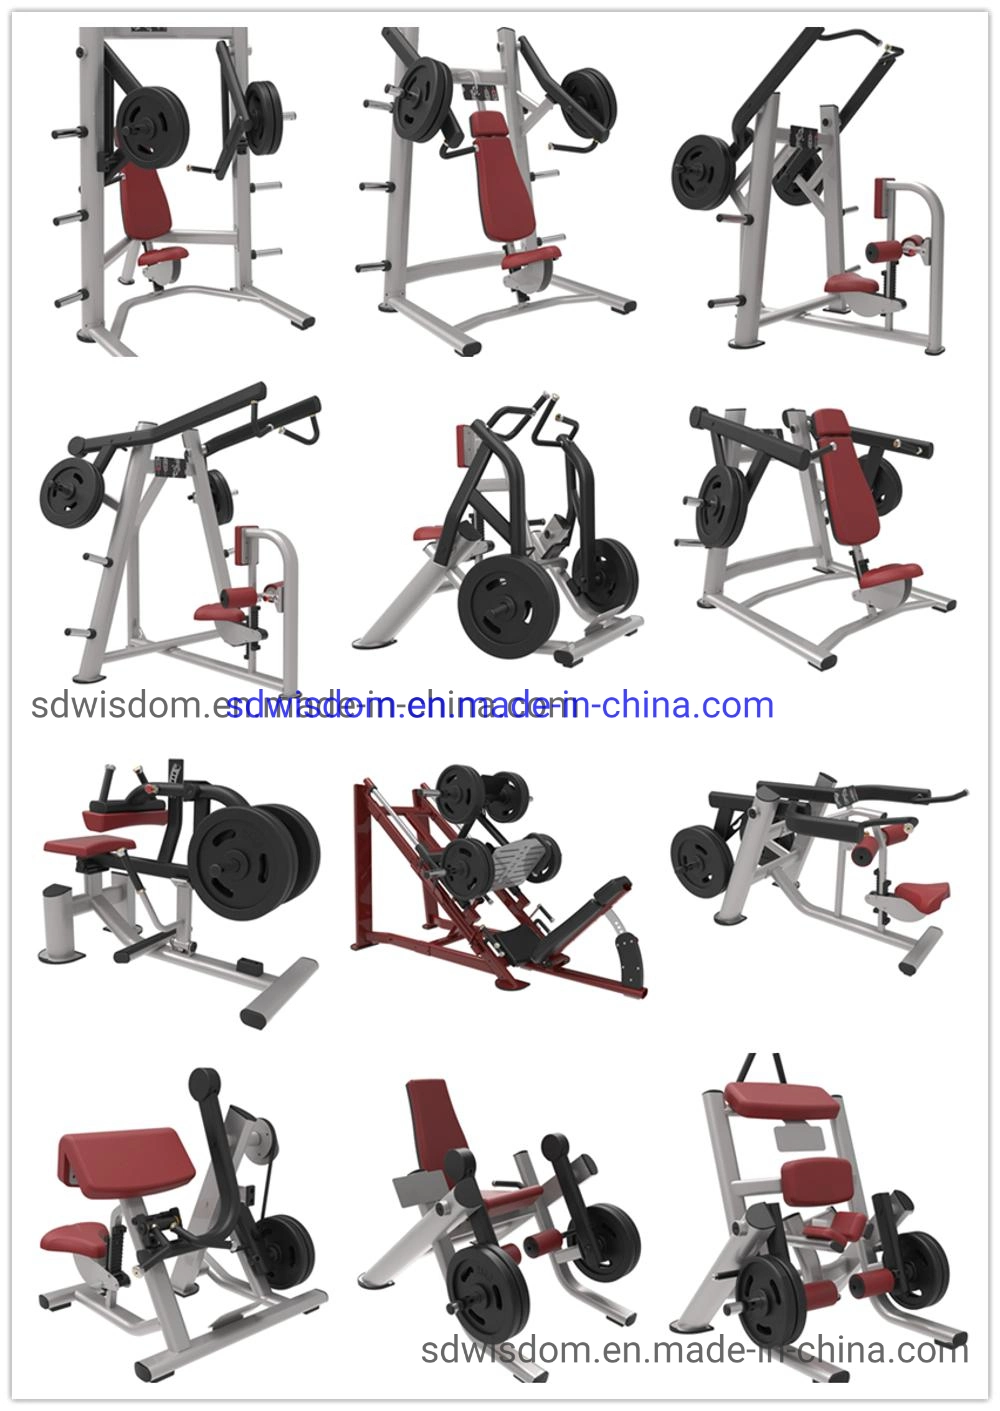 Lp5005 Gym Commercial Fitness Equipment Strength Machine Plate Loaded Biceps Curl for Professional Workout